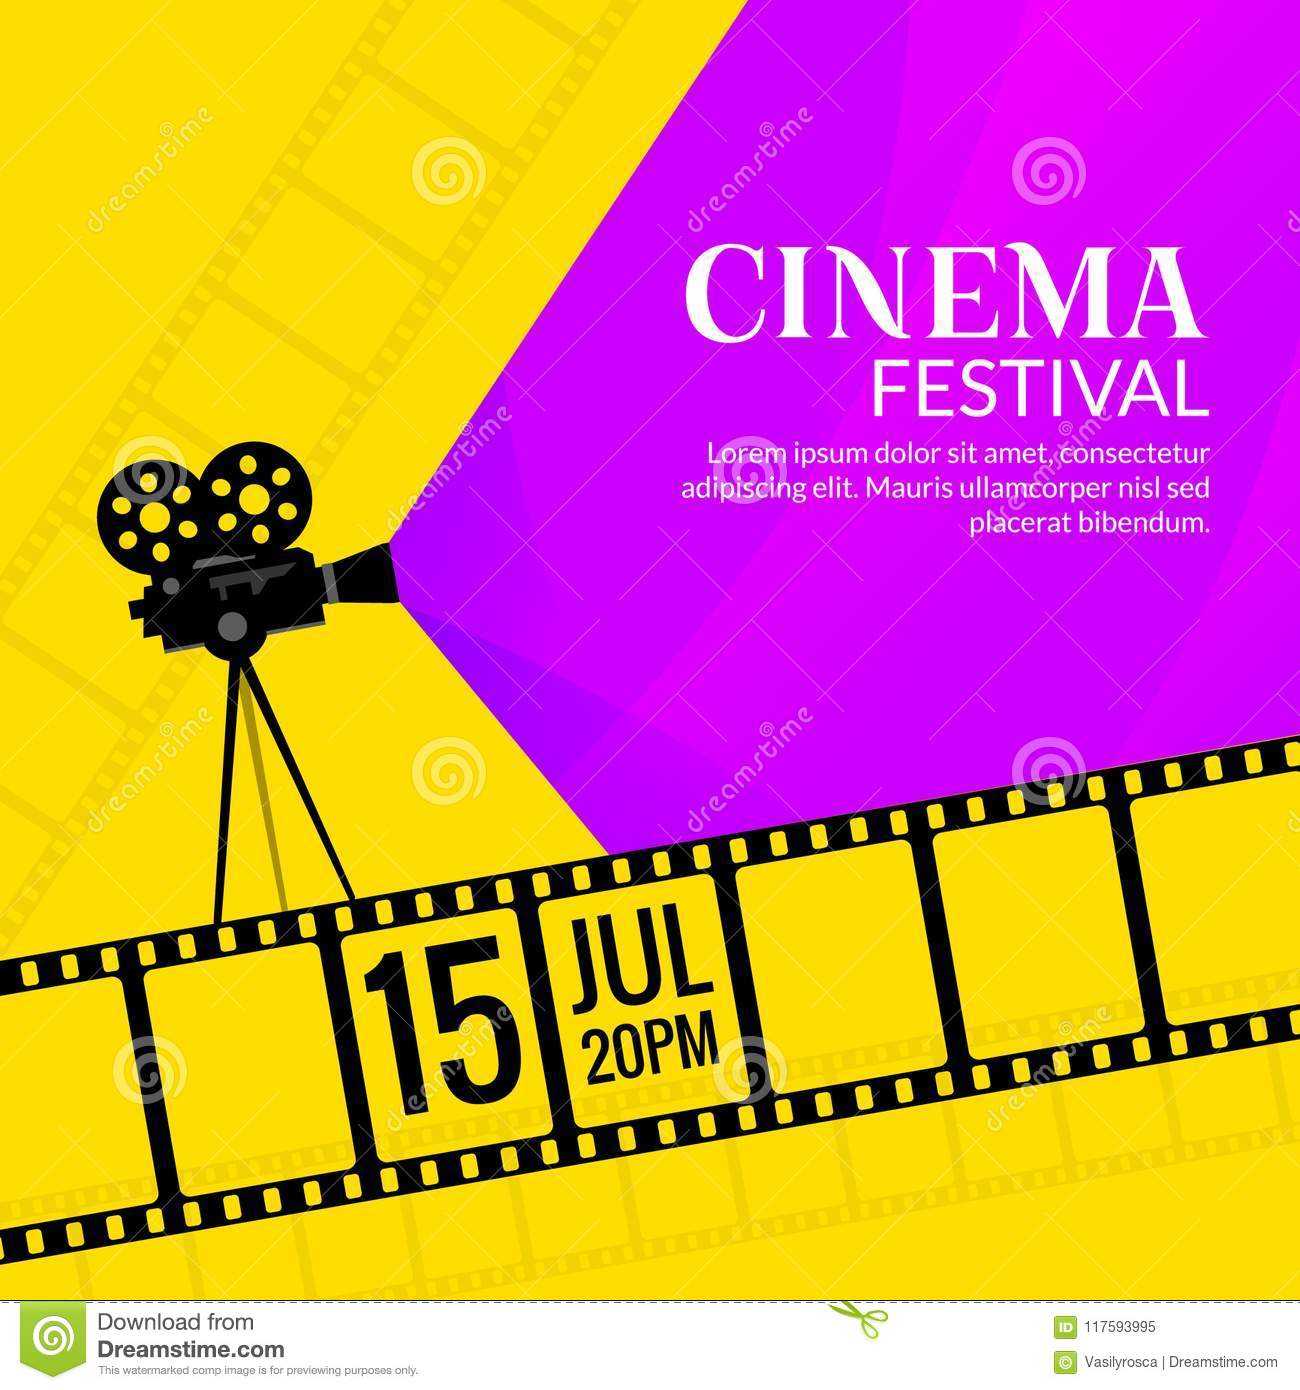 Cinema Festival Poster Template. Film Or Movie Flyer With Film Festival Brochure Template